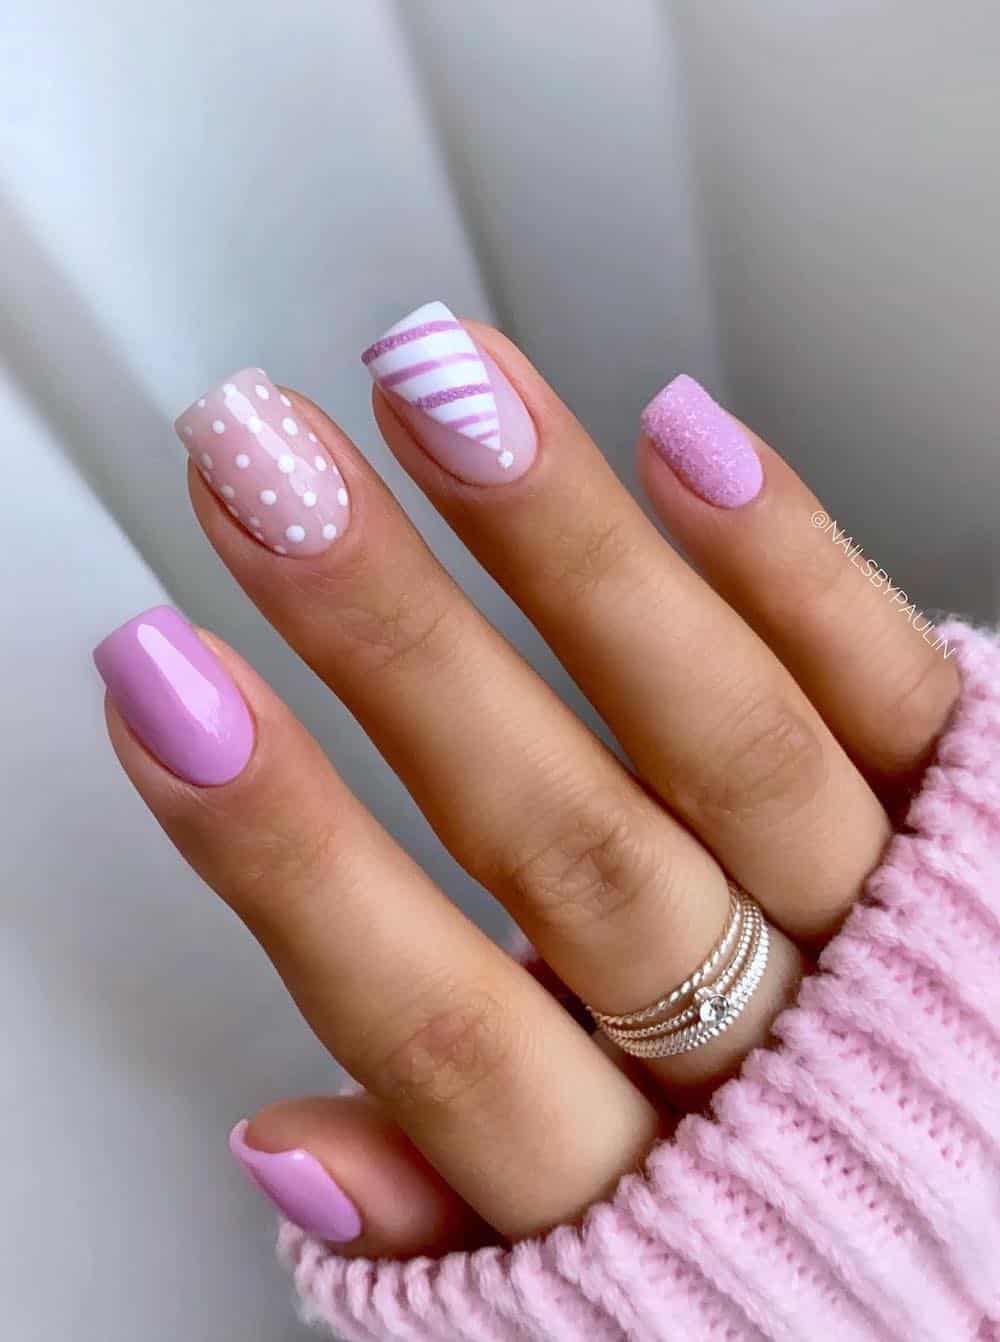 A hand with short square nails painted a glossy pink with accent nails featuring snowy pink polish, nude nails with white dots, and a striped pink and white Santa hat